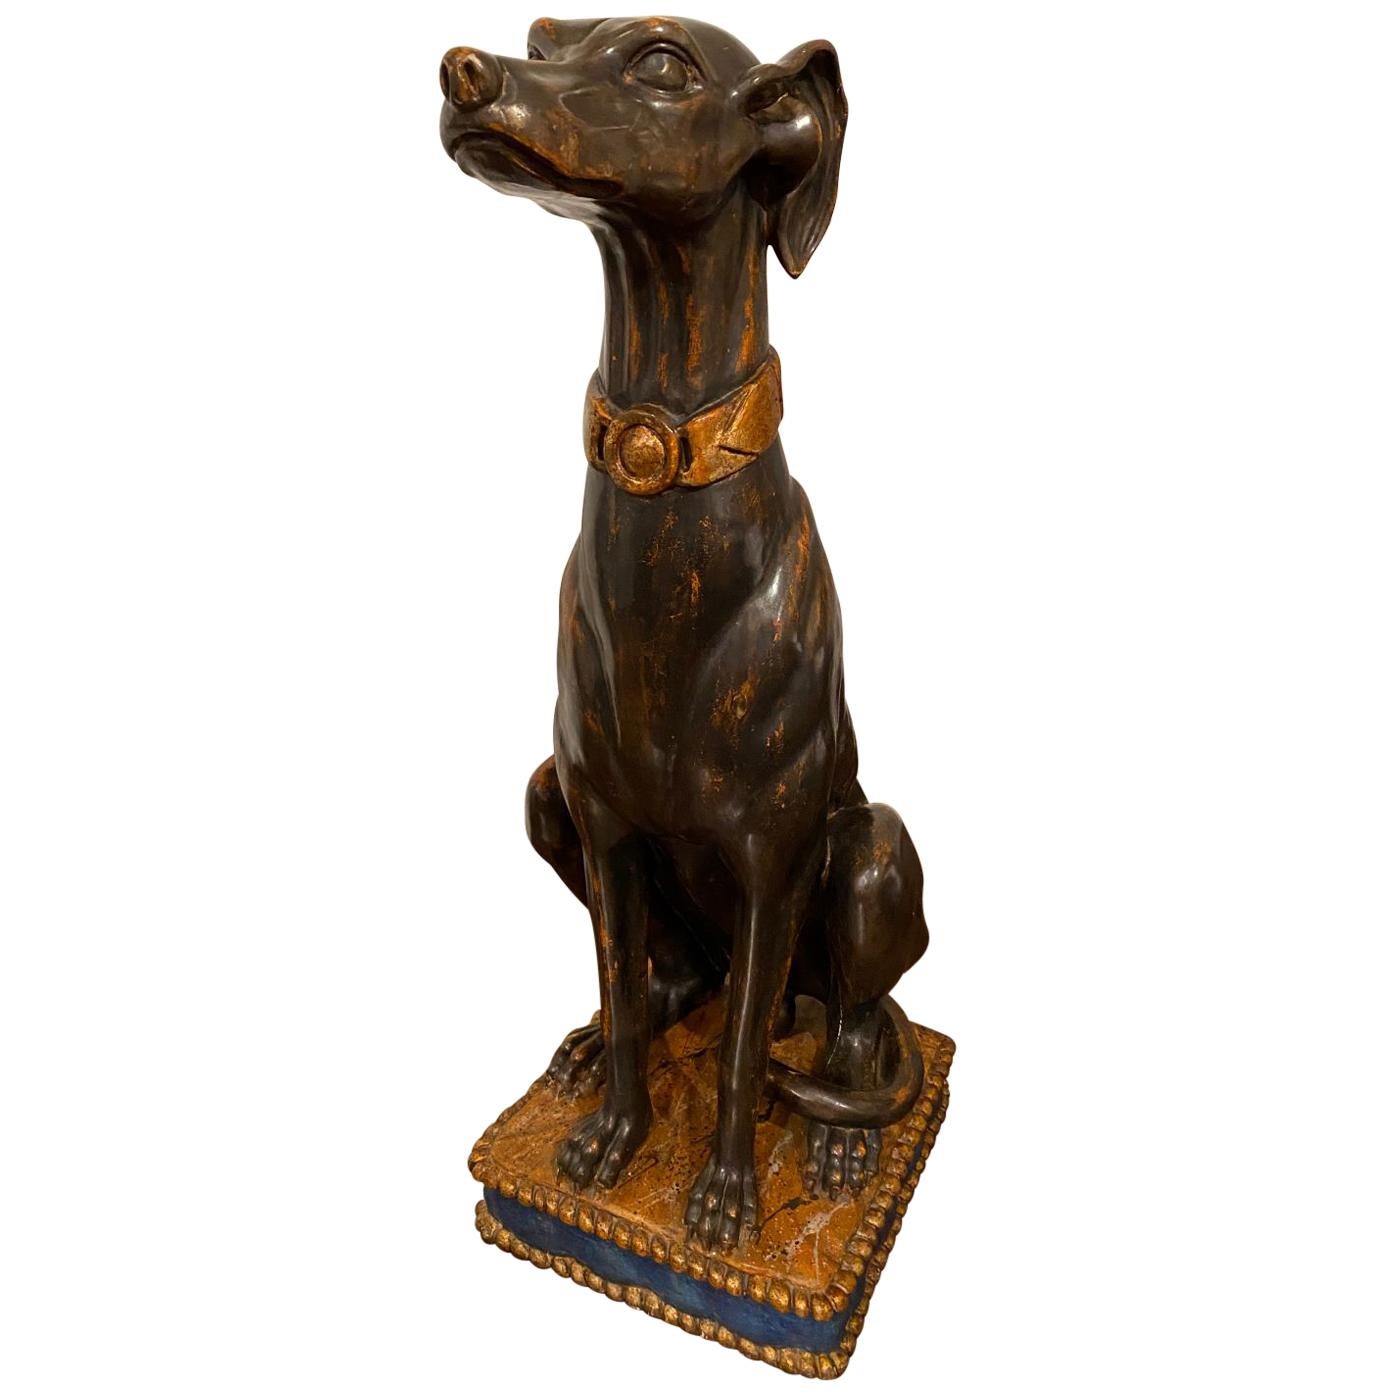 A tall Italian carved polychrome and giltwood model of a greyhound seated on a cushion.

Italy, 19th century

Dimensions : H. 83 cm – W. 32 cm – D. 29 cm (32 5/8 – 12 9/16 x 11 7/16 in)

The greyhound sculpture from the 19th century features